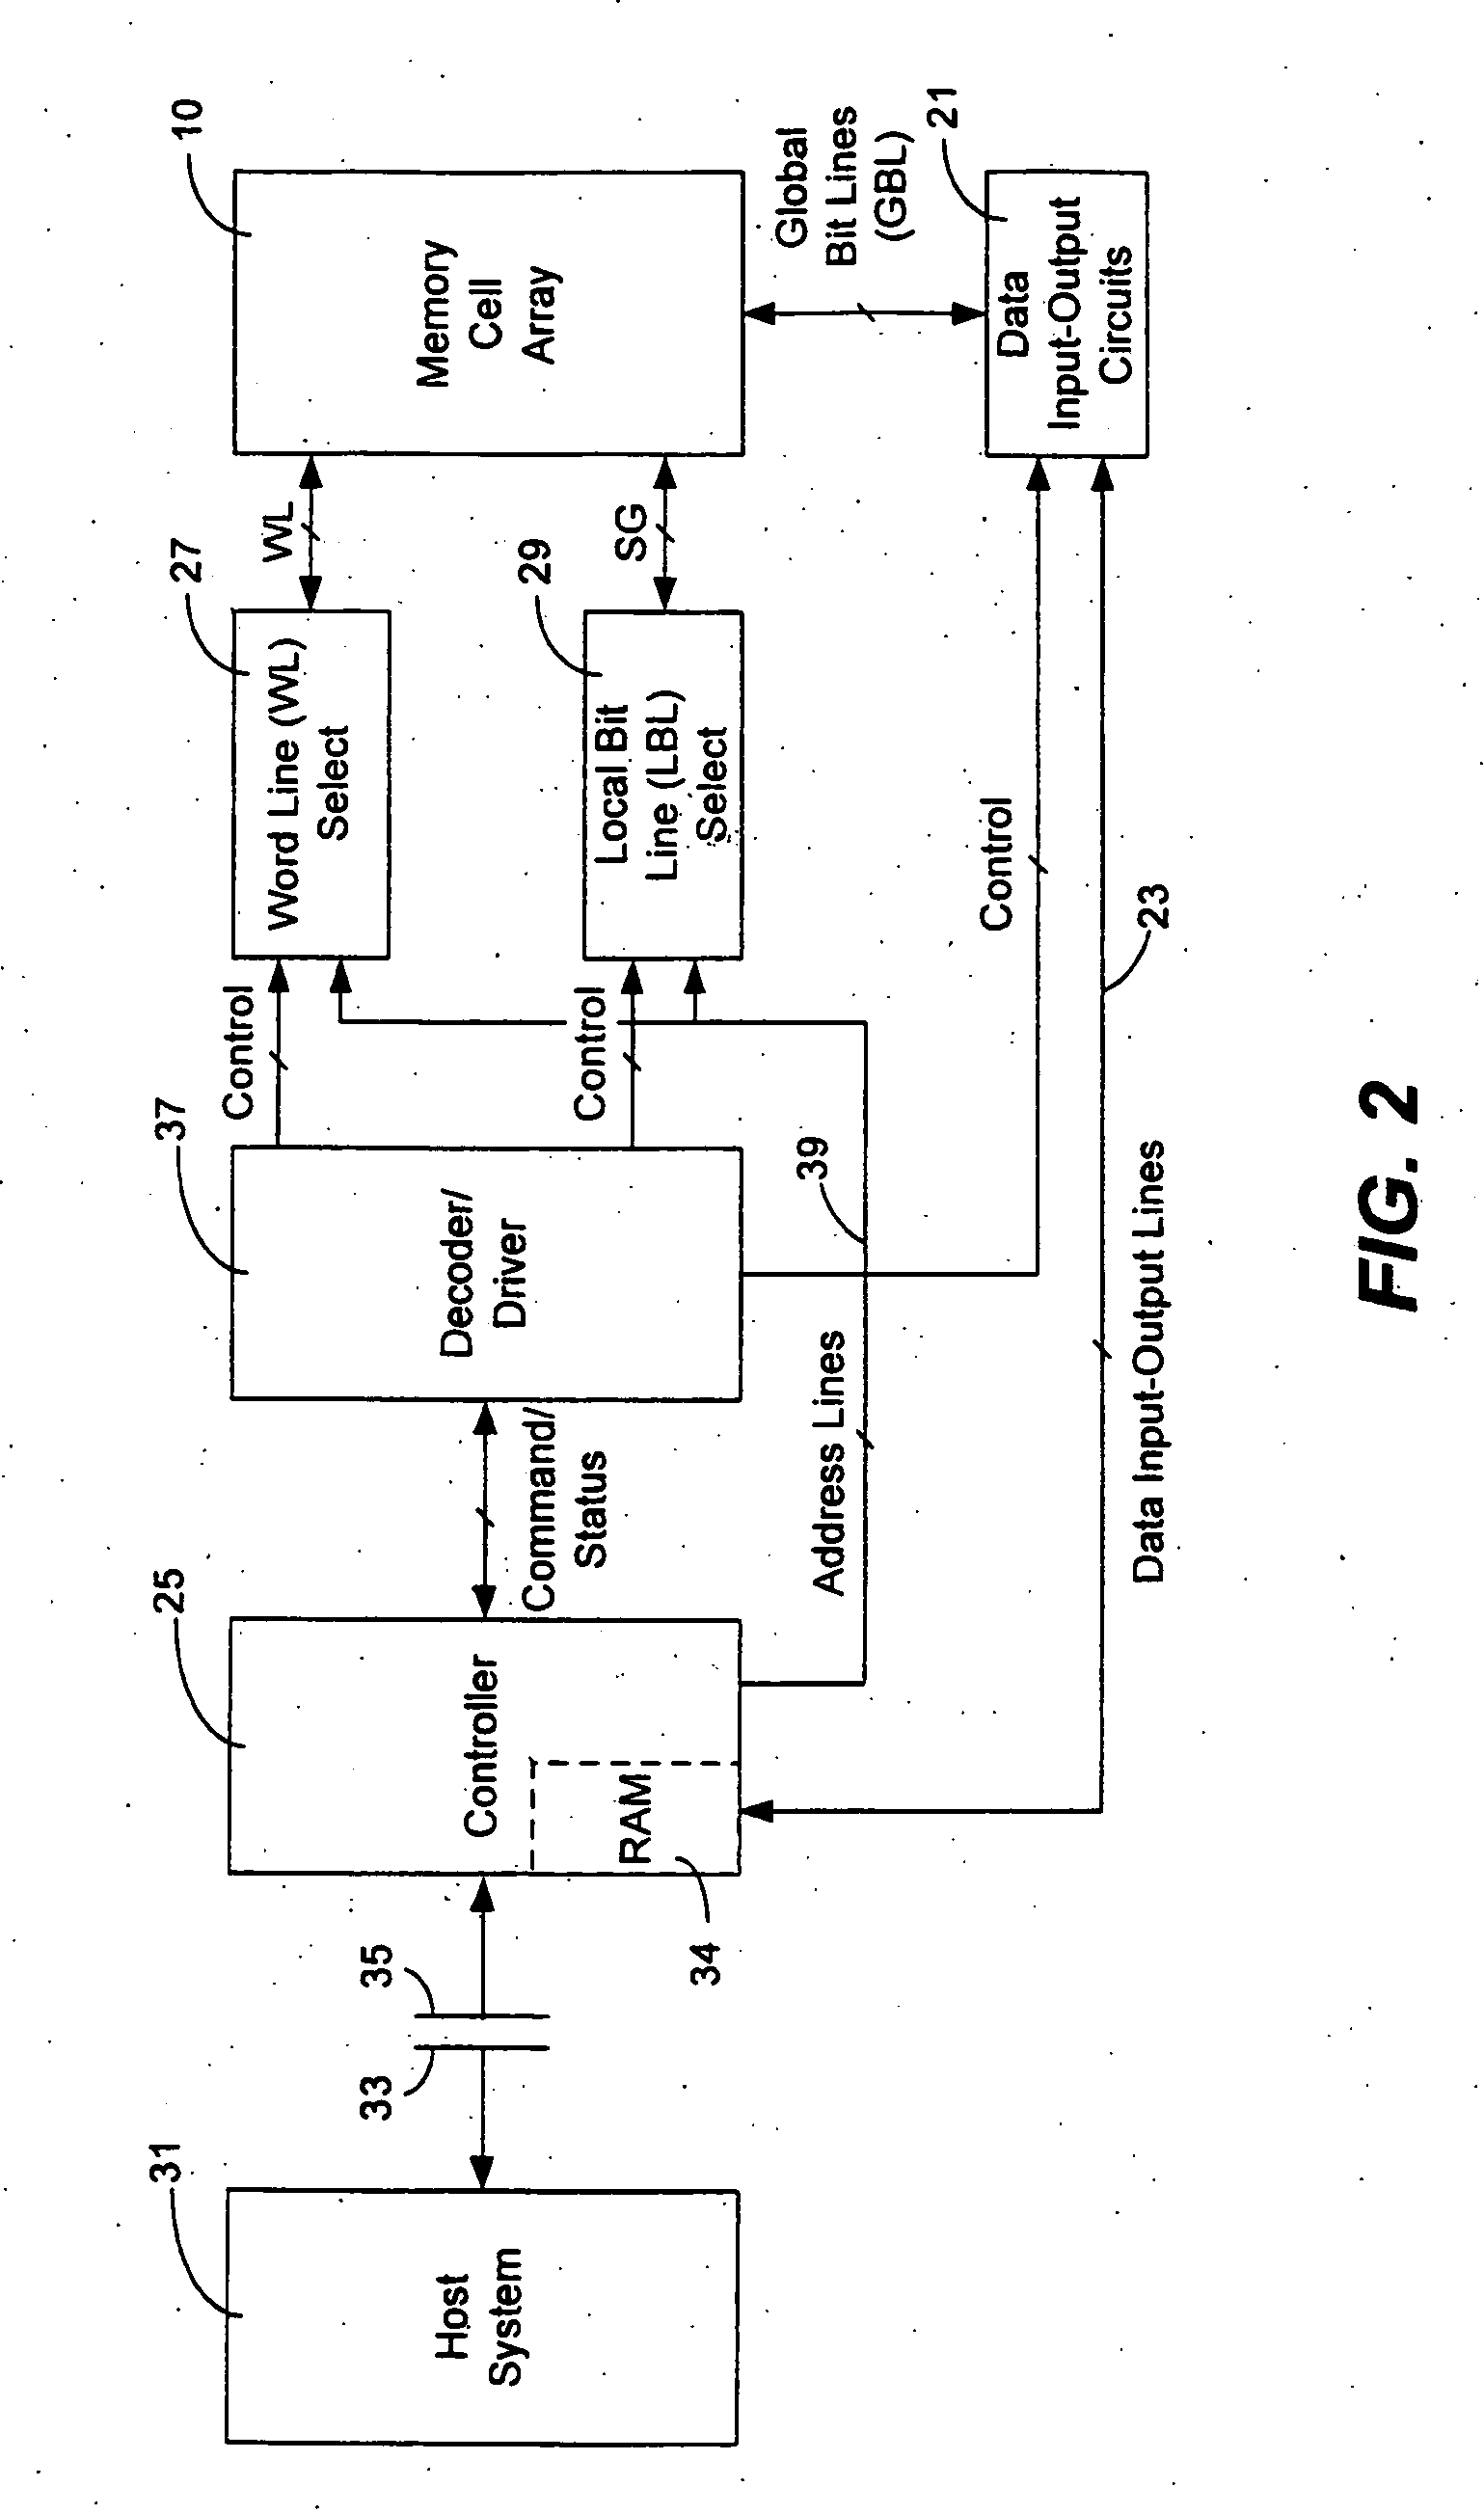 Three-Dimensional Array of Re-Programmable Non-Volatile Memory Elements Having Vertical Bit Lines and a Single-Sided Word Line Architecture